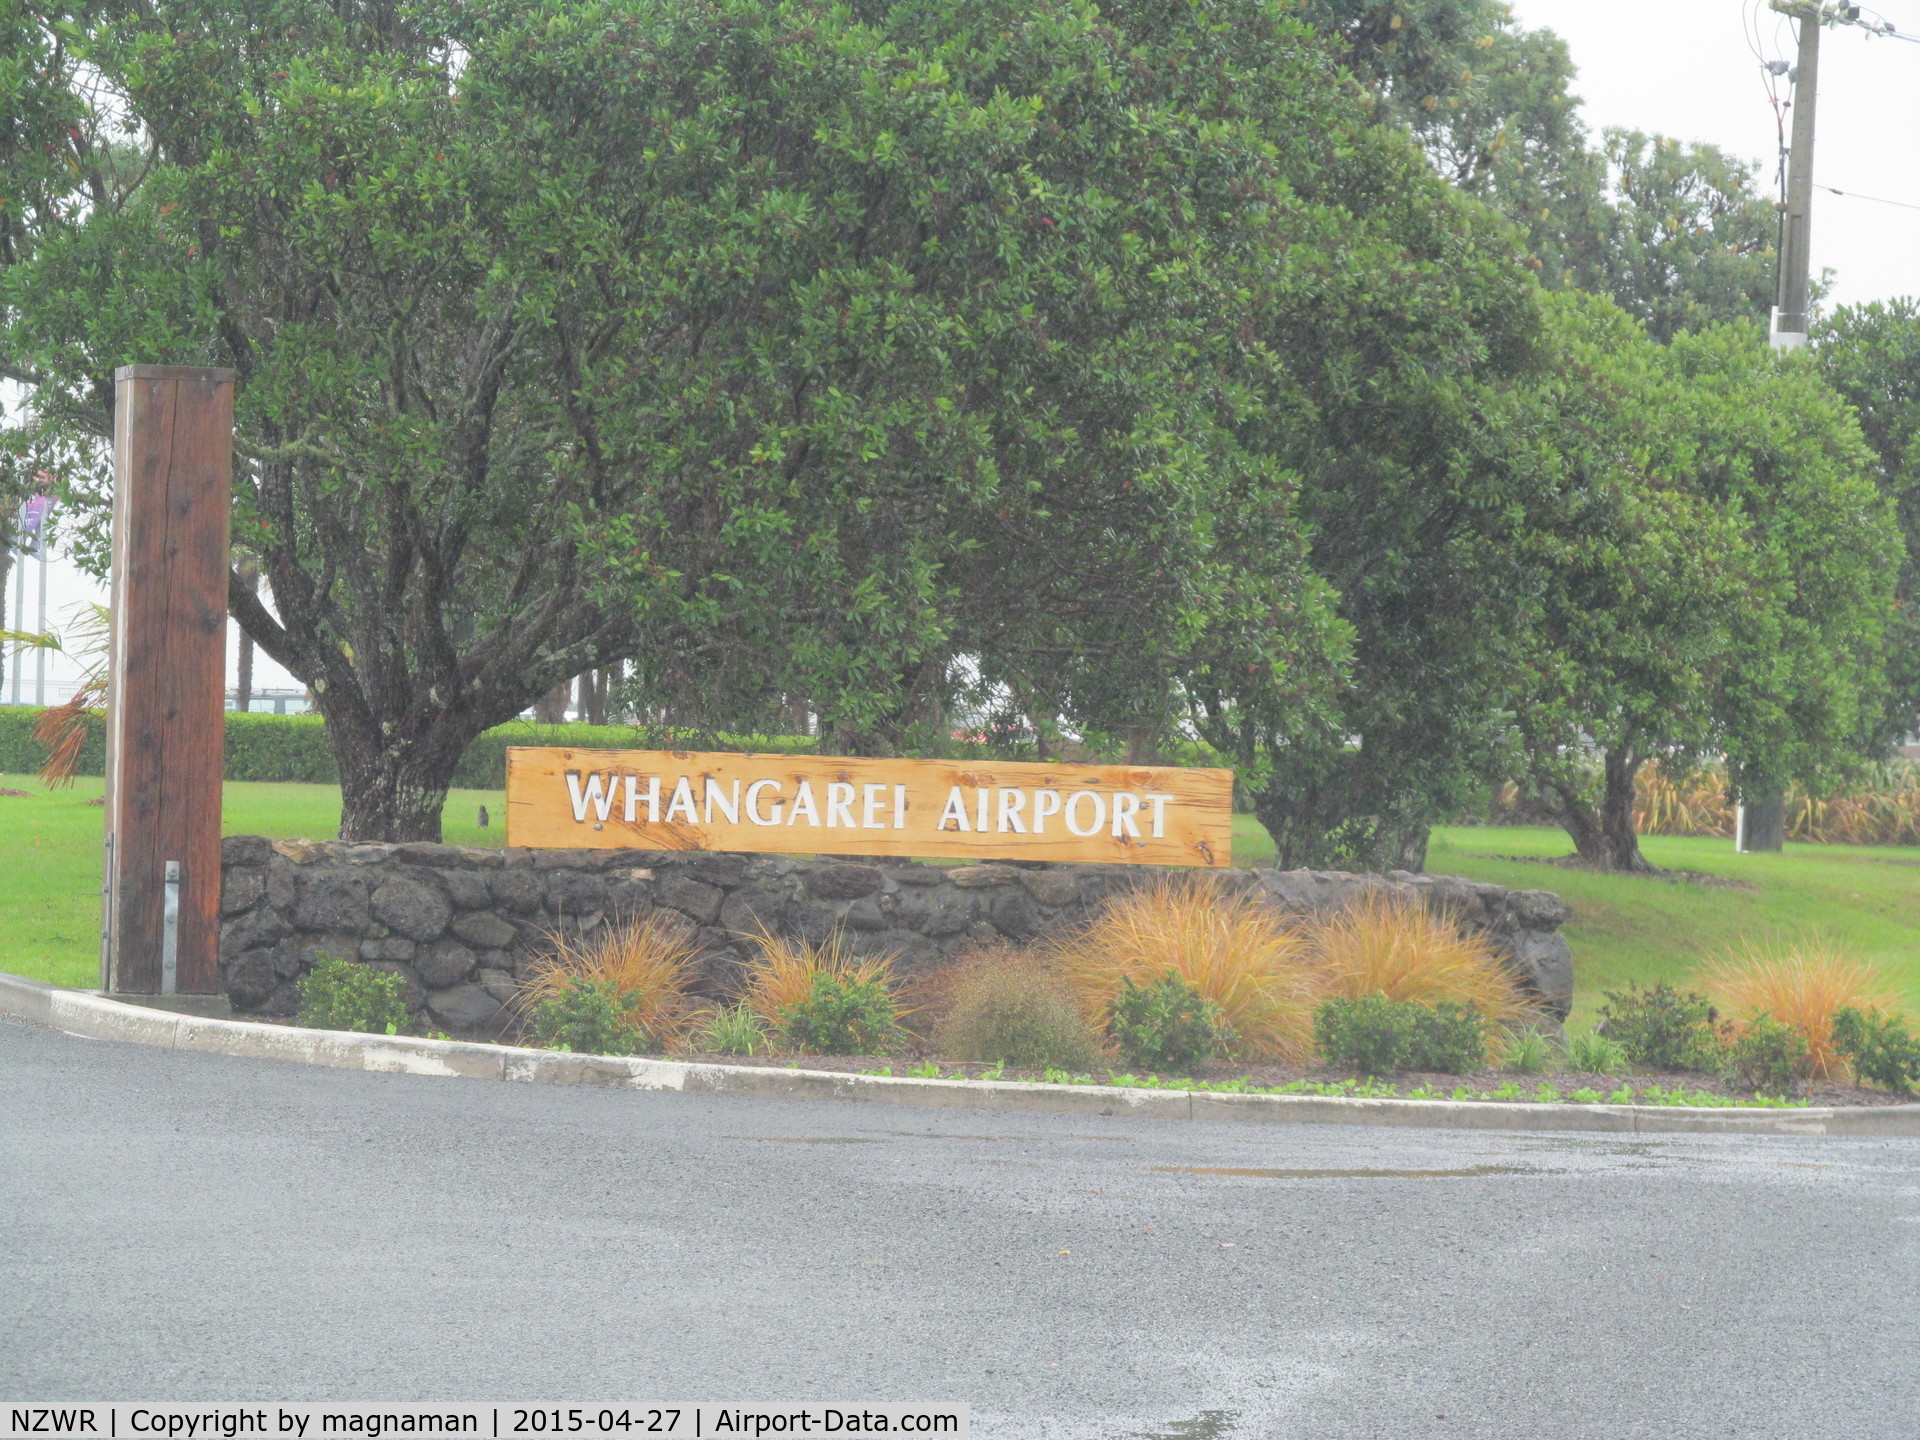 Whangarei Airport, Whangarei New Zealand (NZWR) - Entrance to the airport - located on top of hill about 7k outside of Whangarei itself.